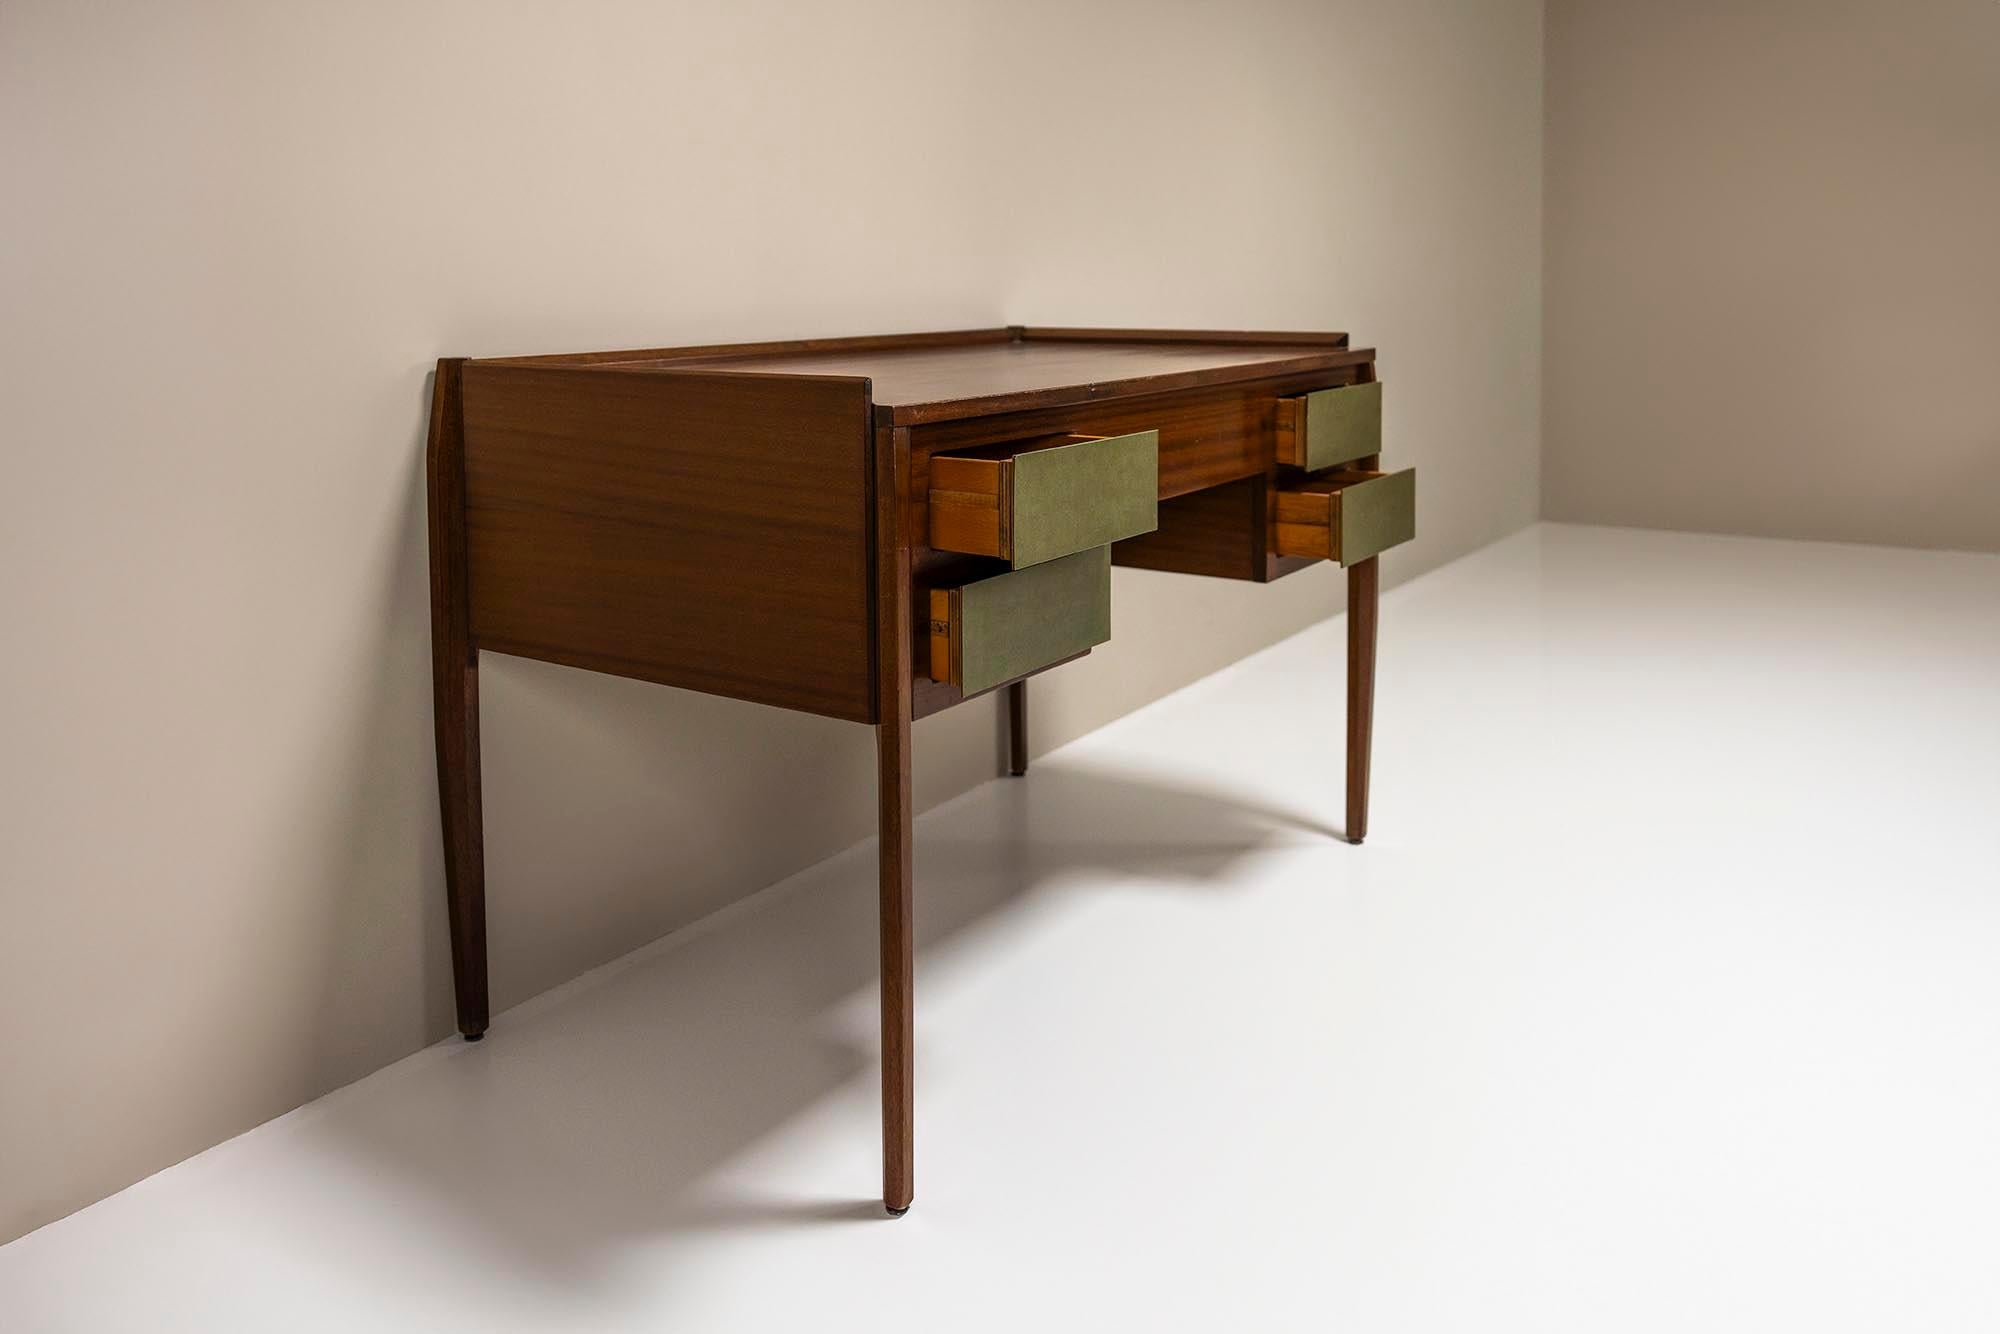 Mid-20th Century Desk In Mahogany Veneer Attributed To Gio Ponti, Italy 1950's For Sale